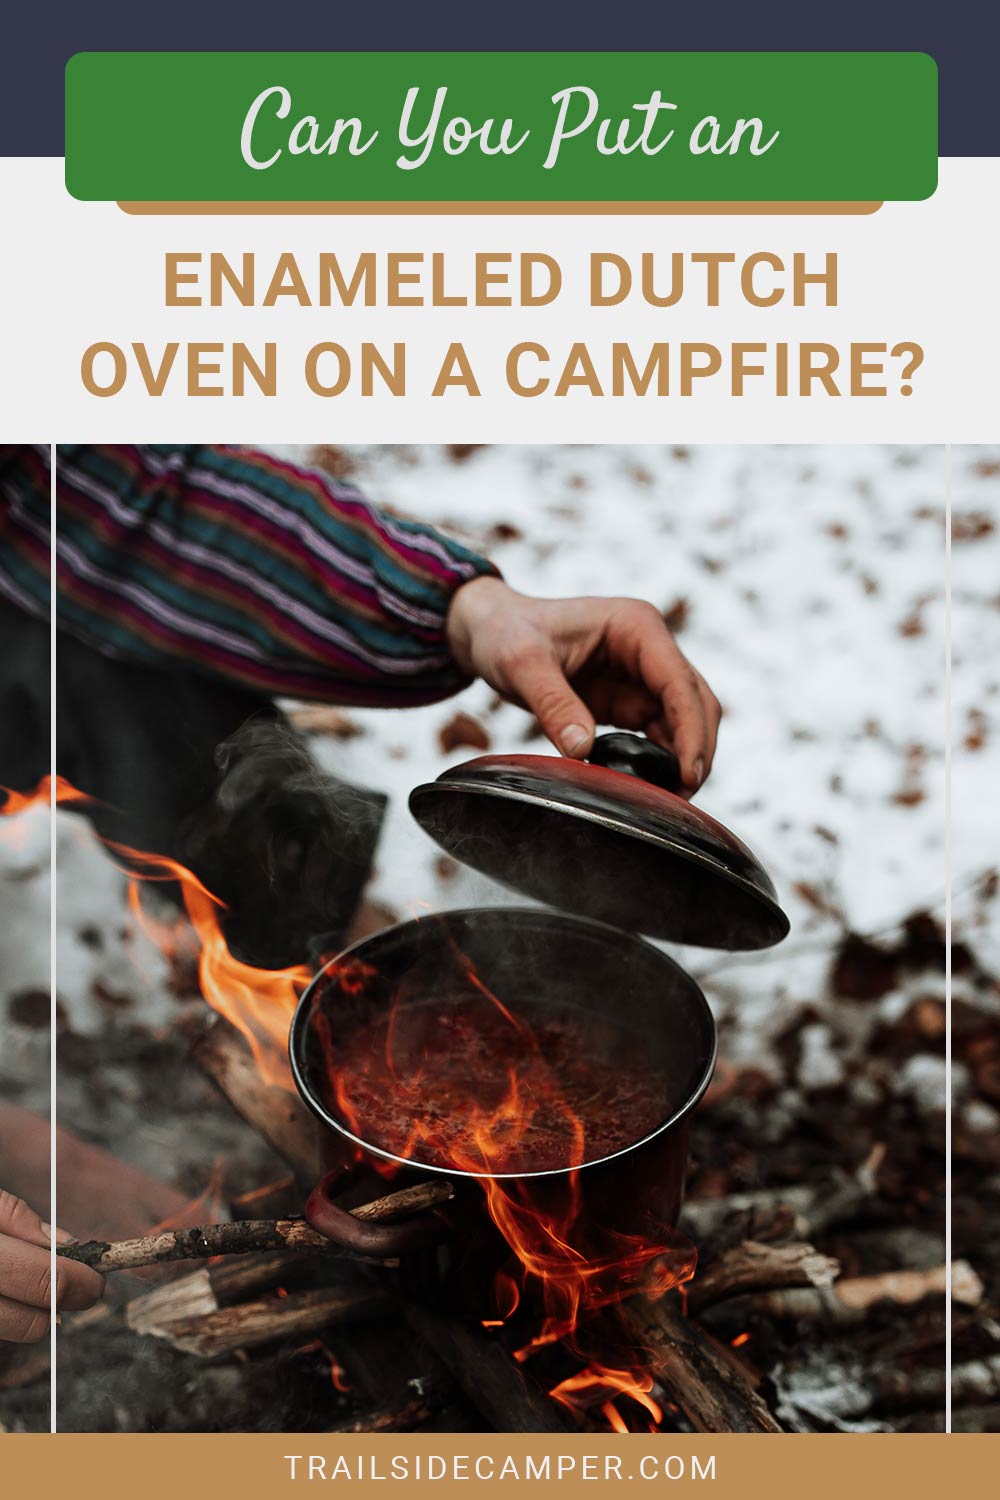 Can You Put an Enameled Dutch Oven on a Campfire?